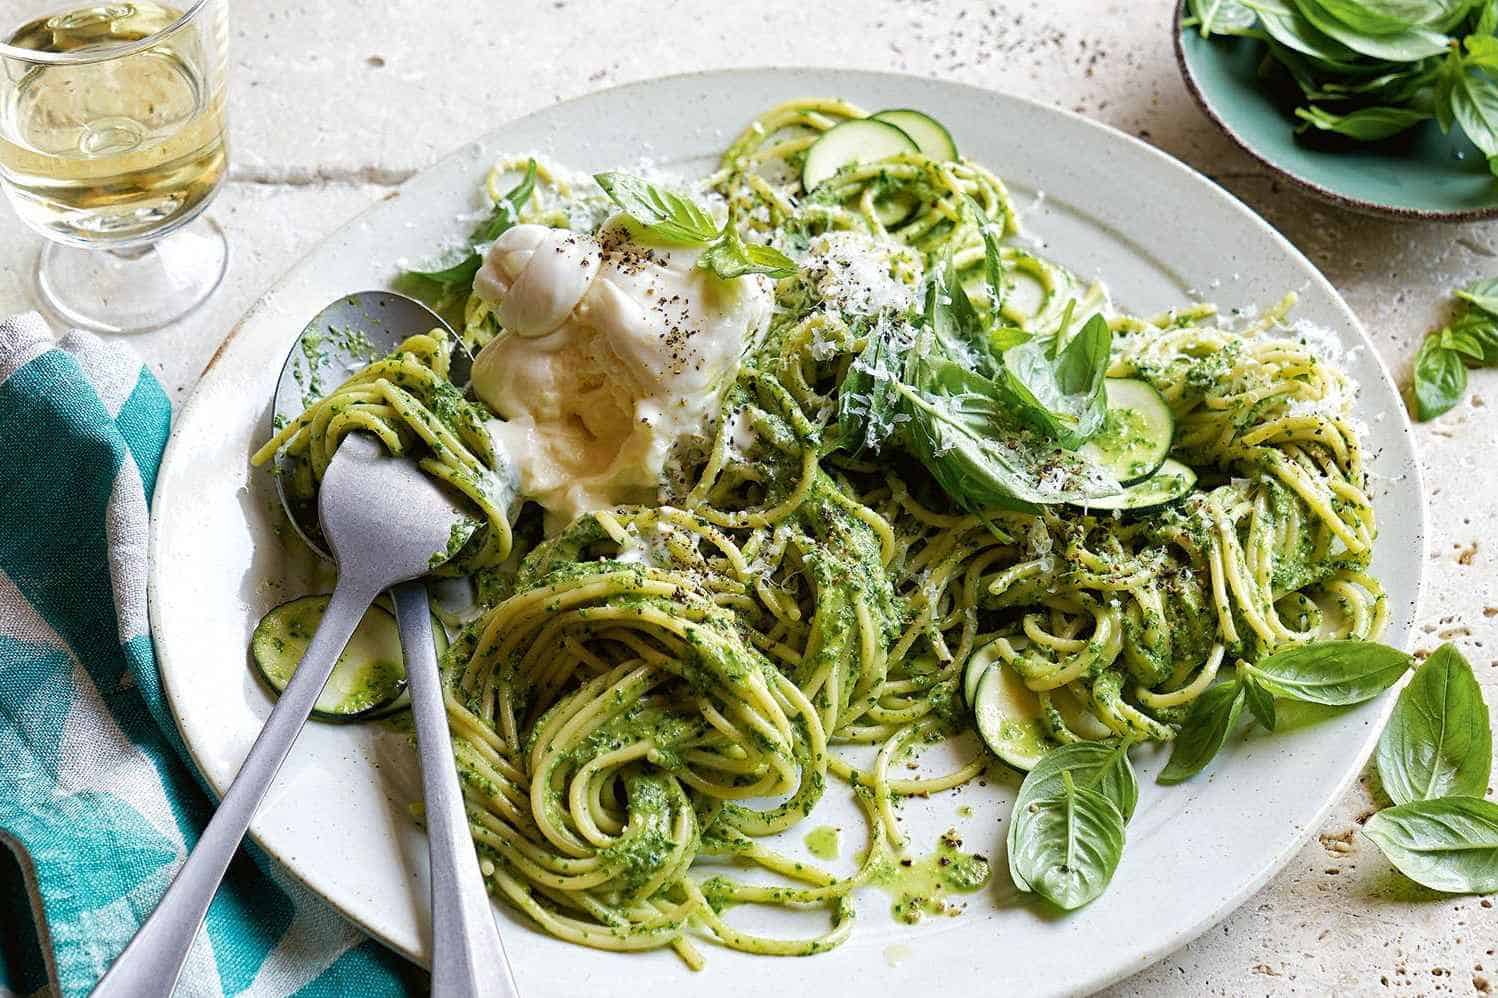 What Wine Goes With Pesto-based Pasta